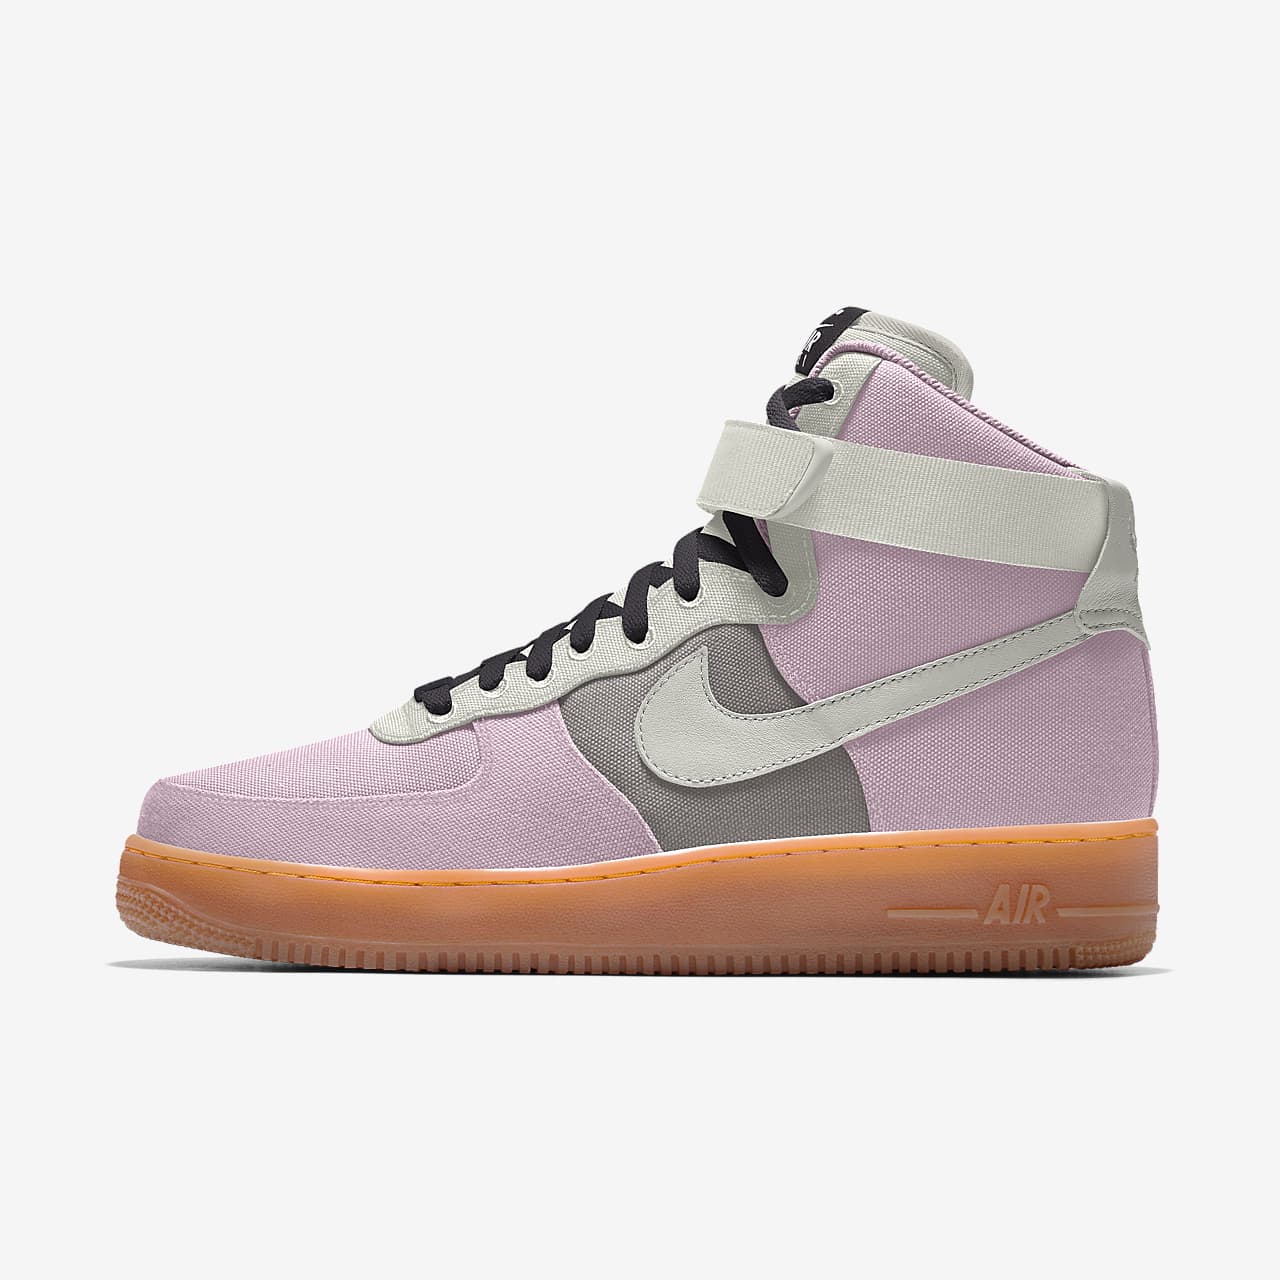 Chaussure personnalisable Nike Air Force 1 High By You pour femme